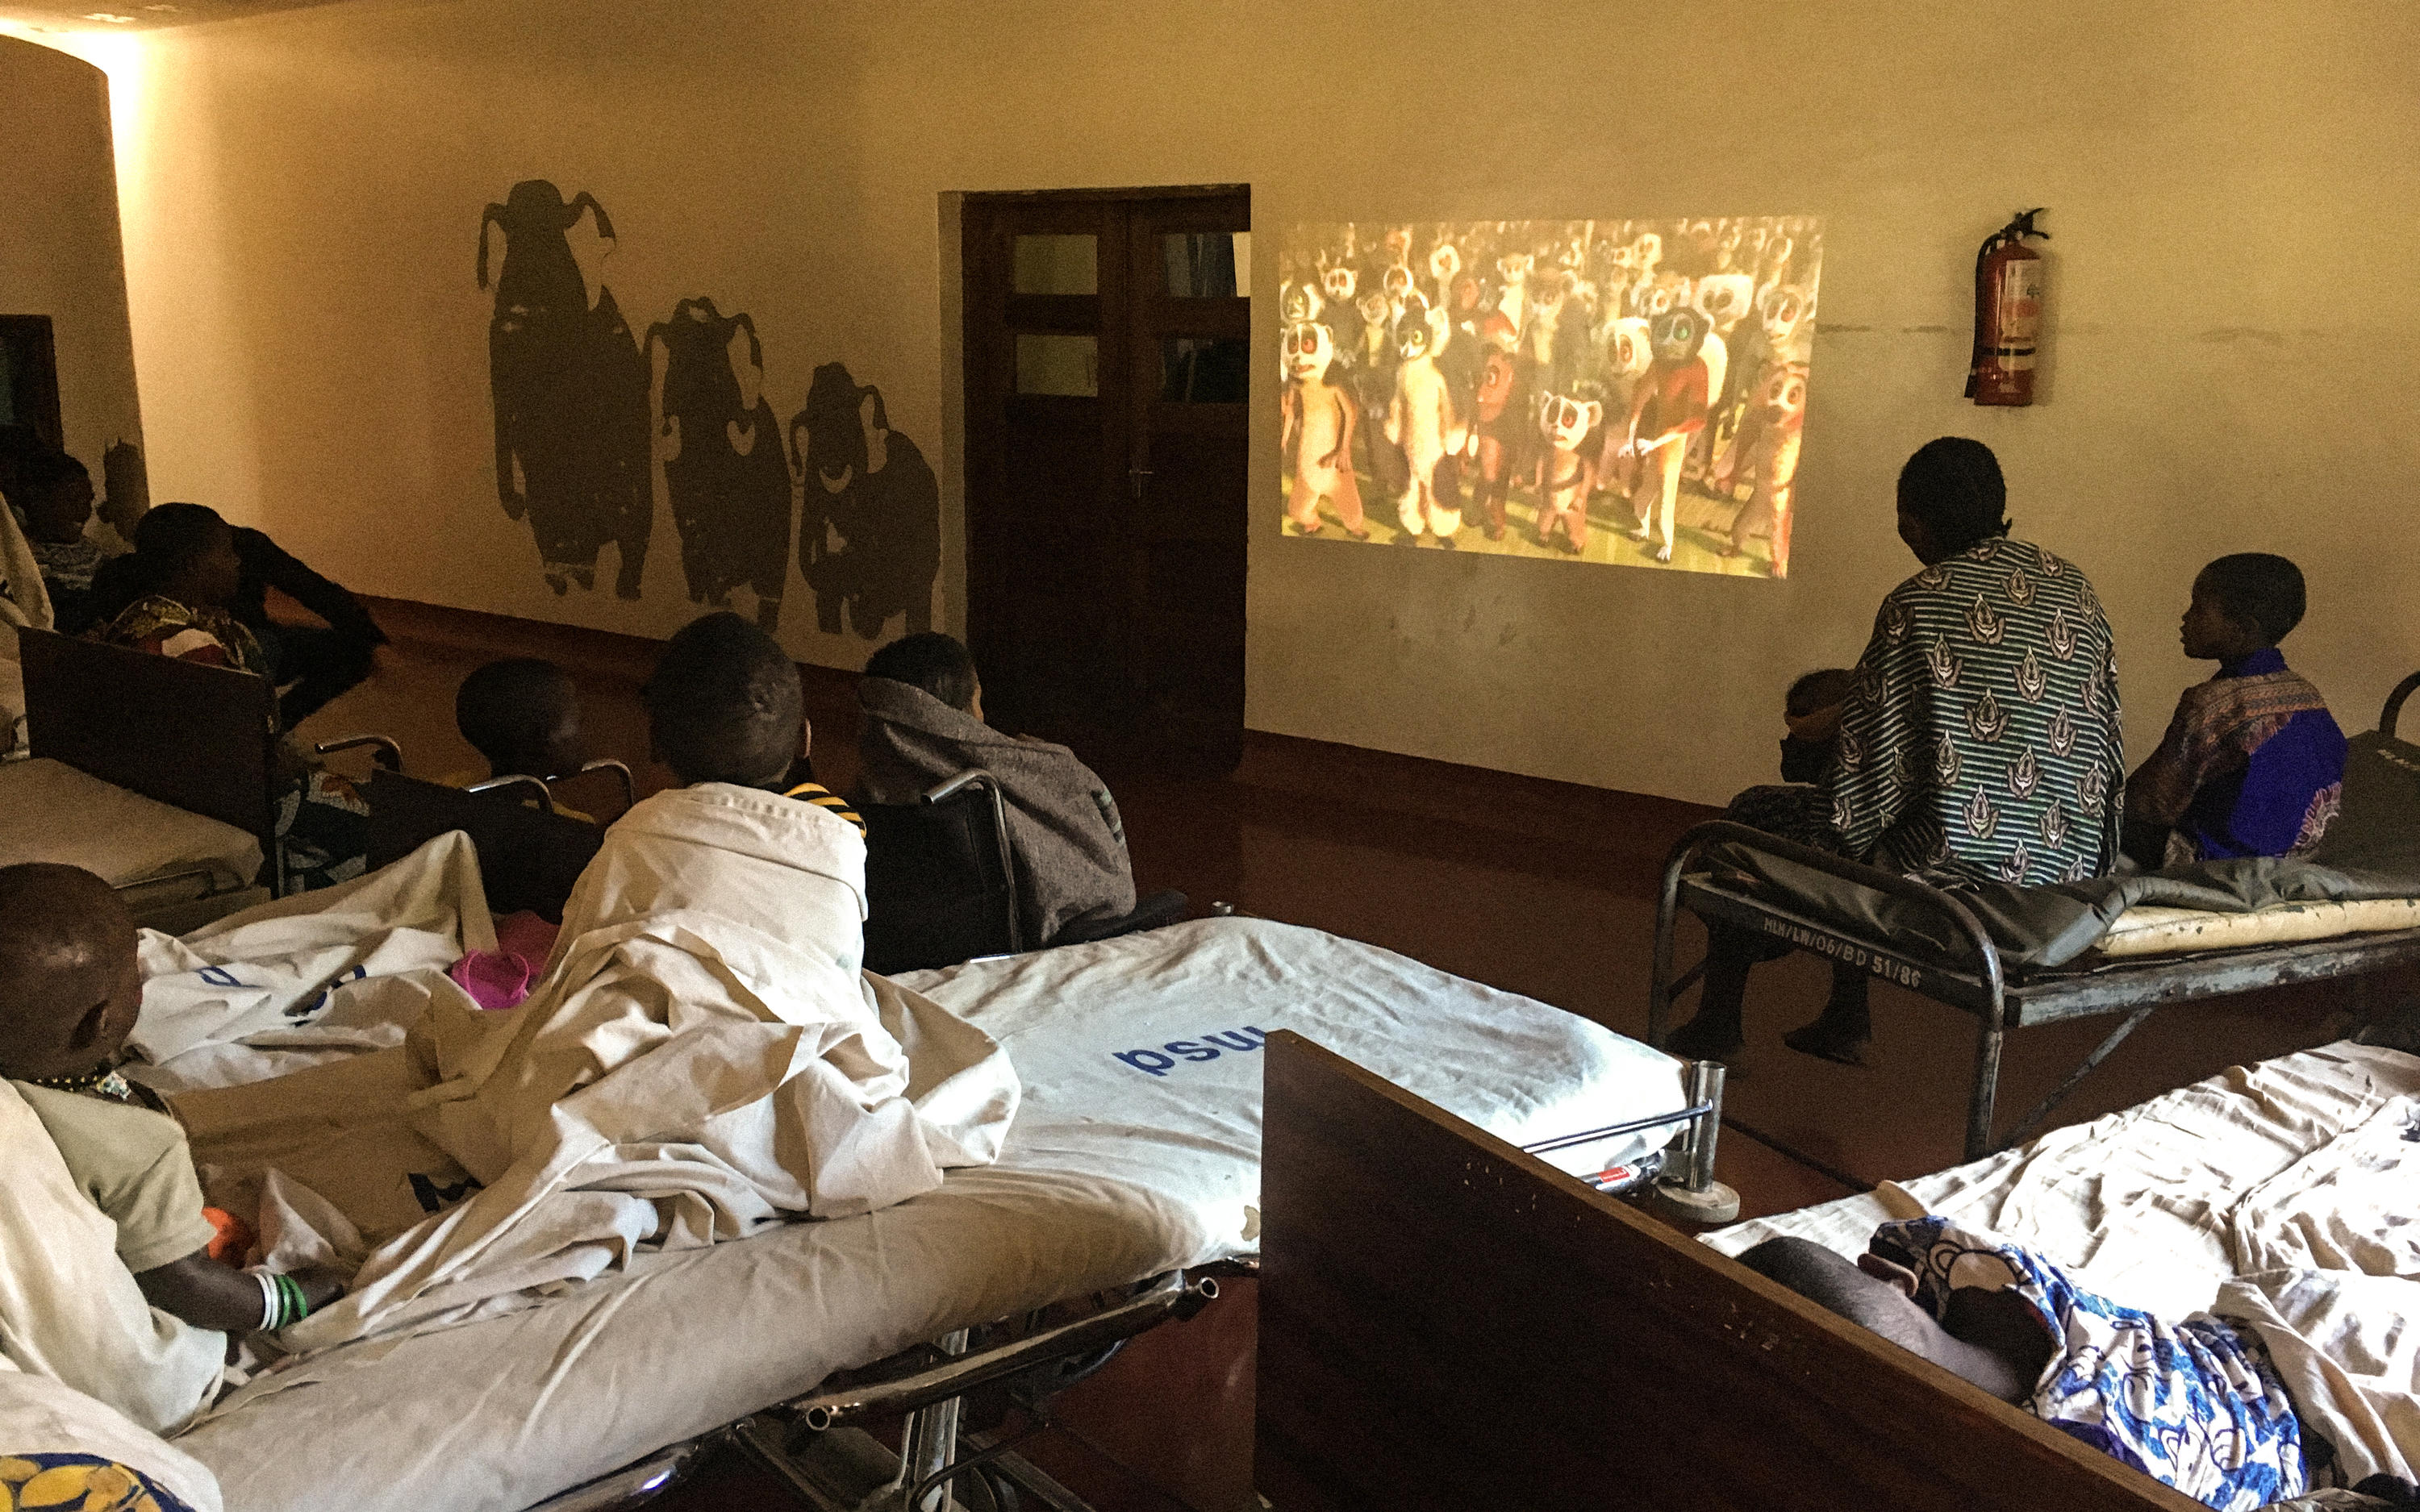 Children watching a movie projected on the wall in the hospital